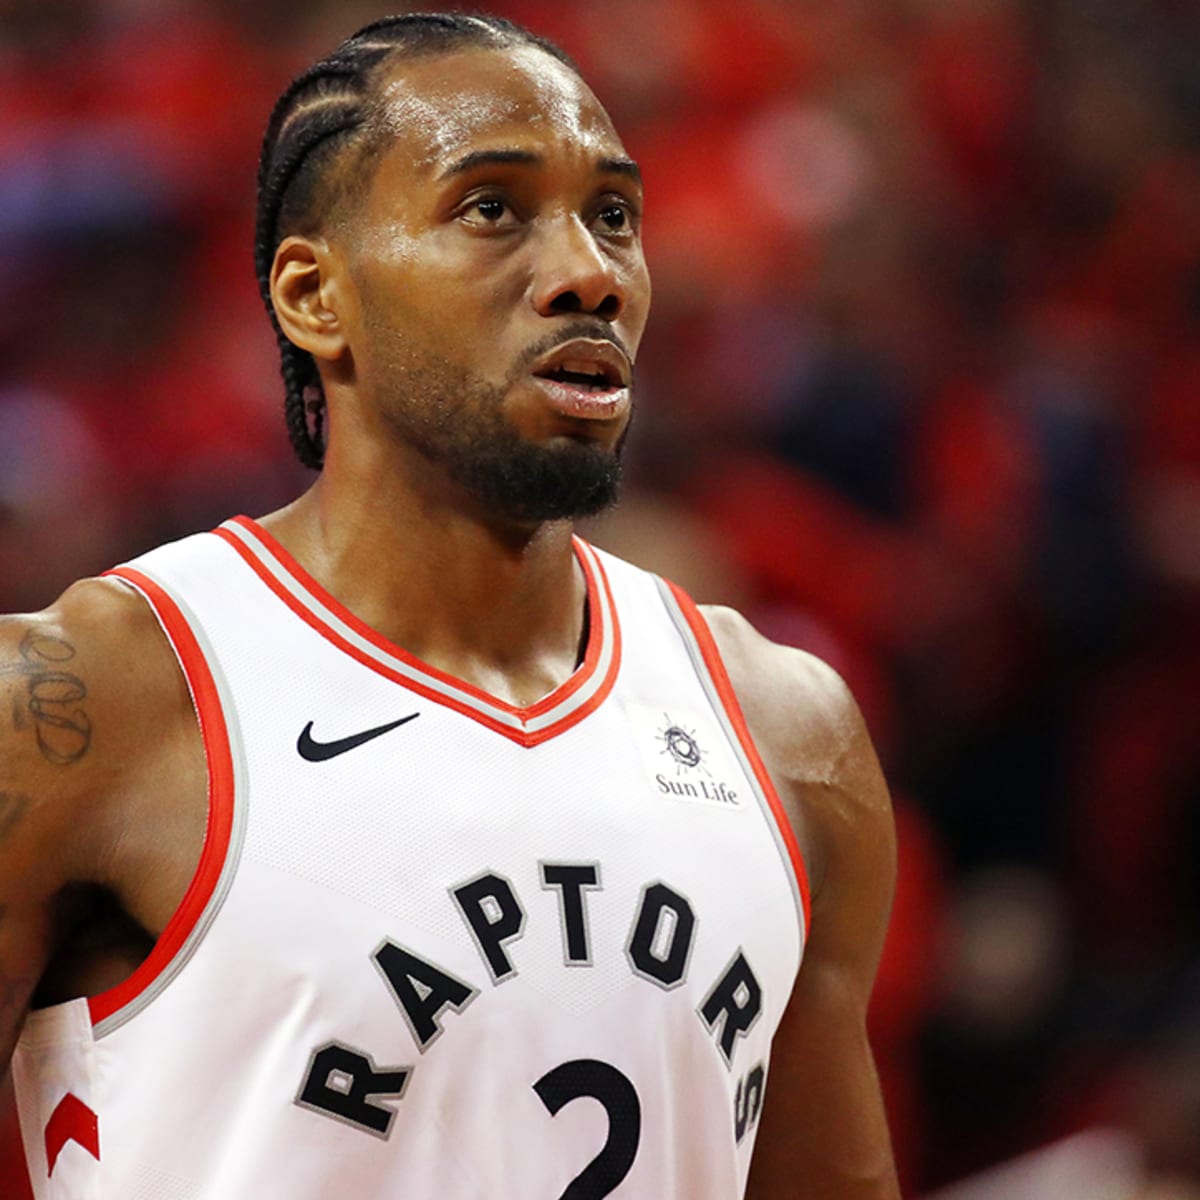 Clippers sign Kawhi Leonard, trade players, picks to Thunder for